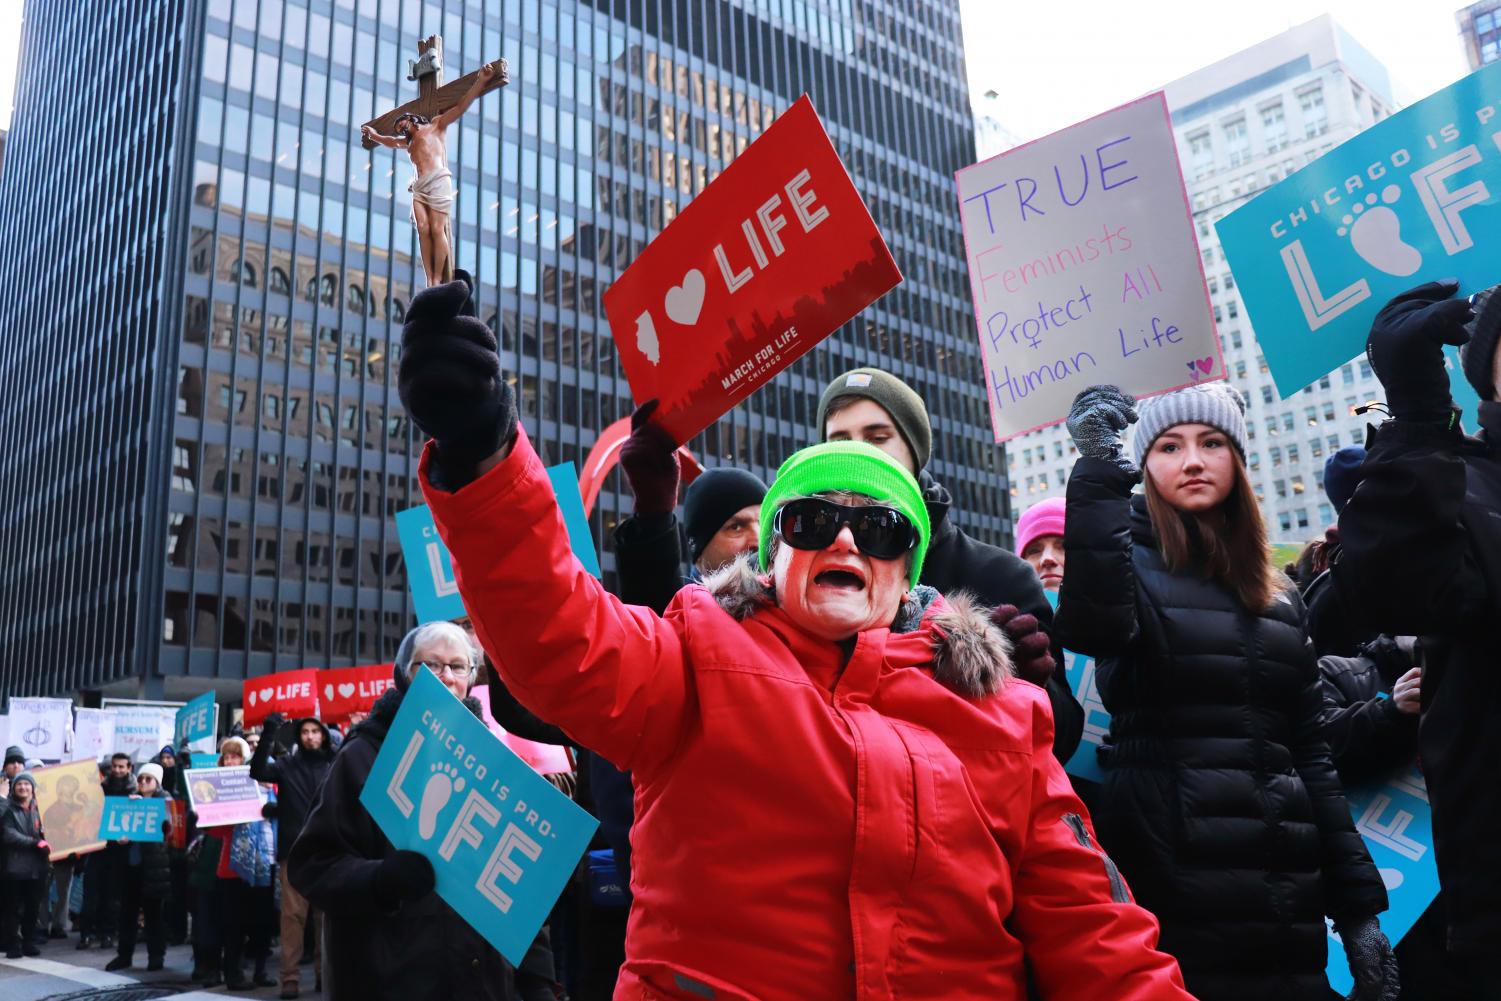 March+for+Life+protestors+face+off+with+counter-protests